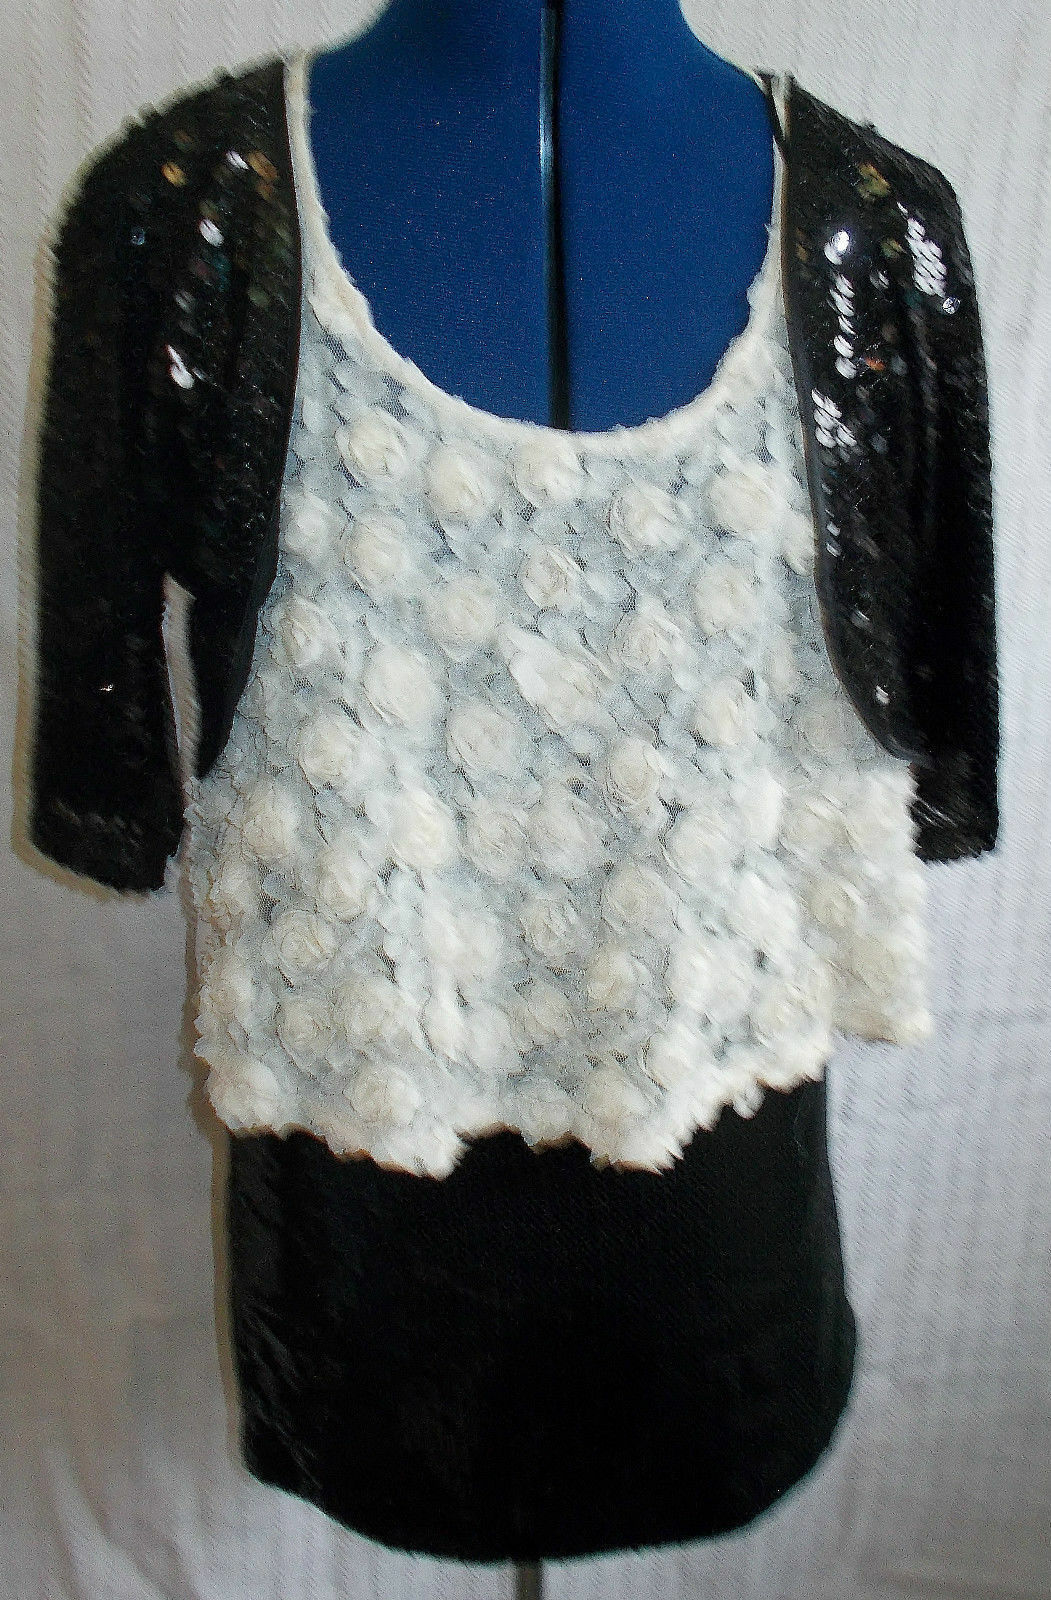 Unusual .cream cropped 60's style flower applique top .size 16, see through Unbranded